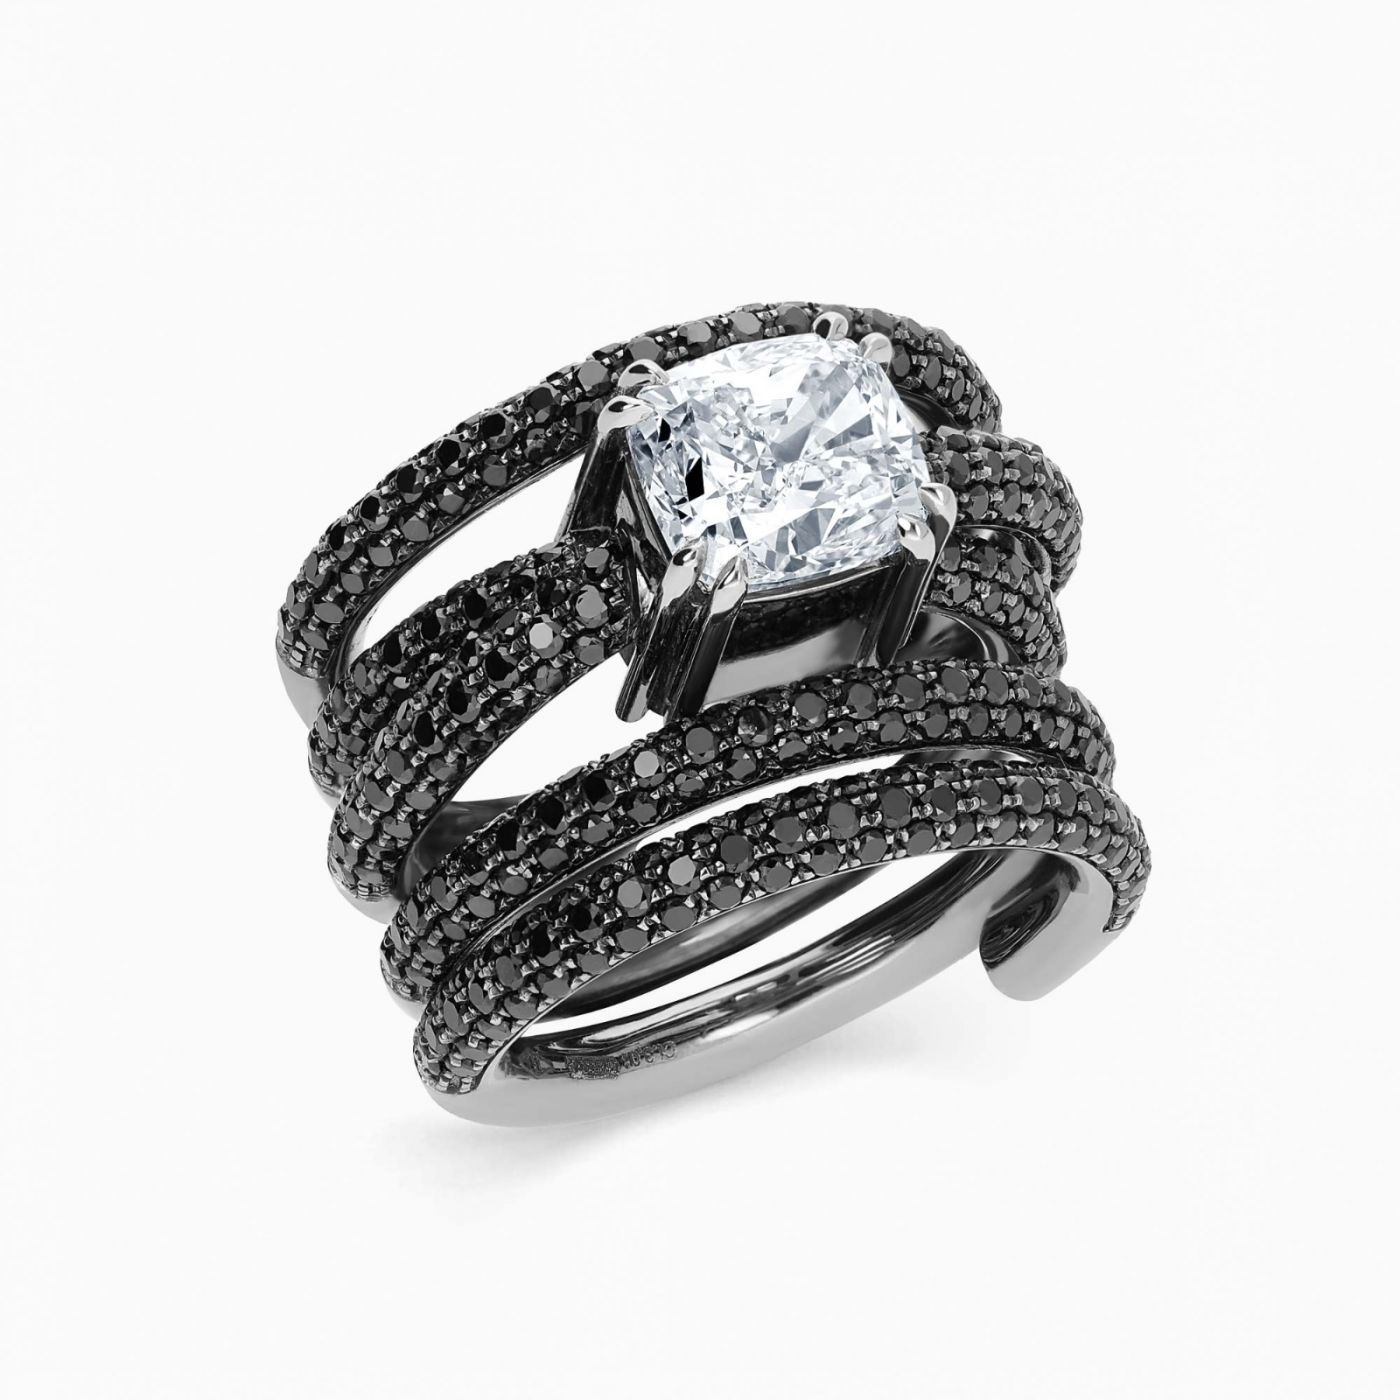 XL ring in black rhodium plated gold with white central diamond and black diamonds